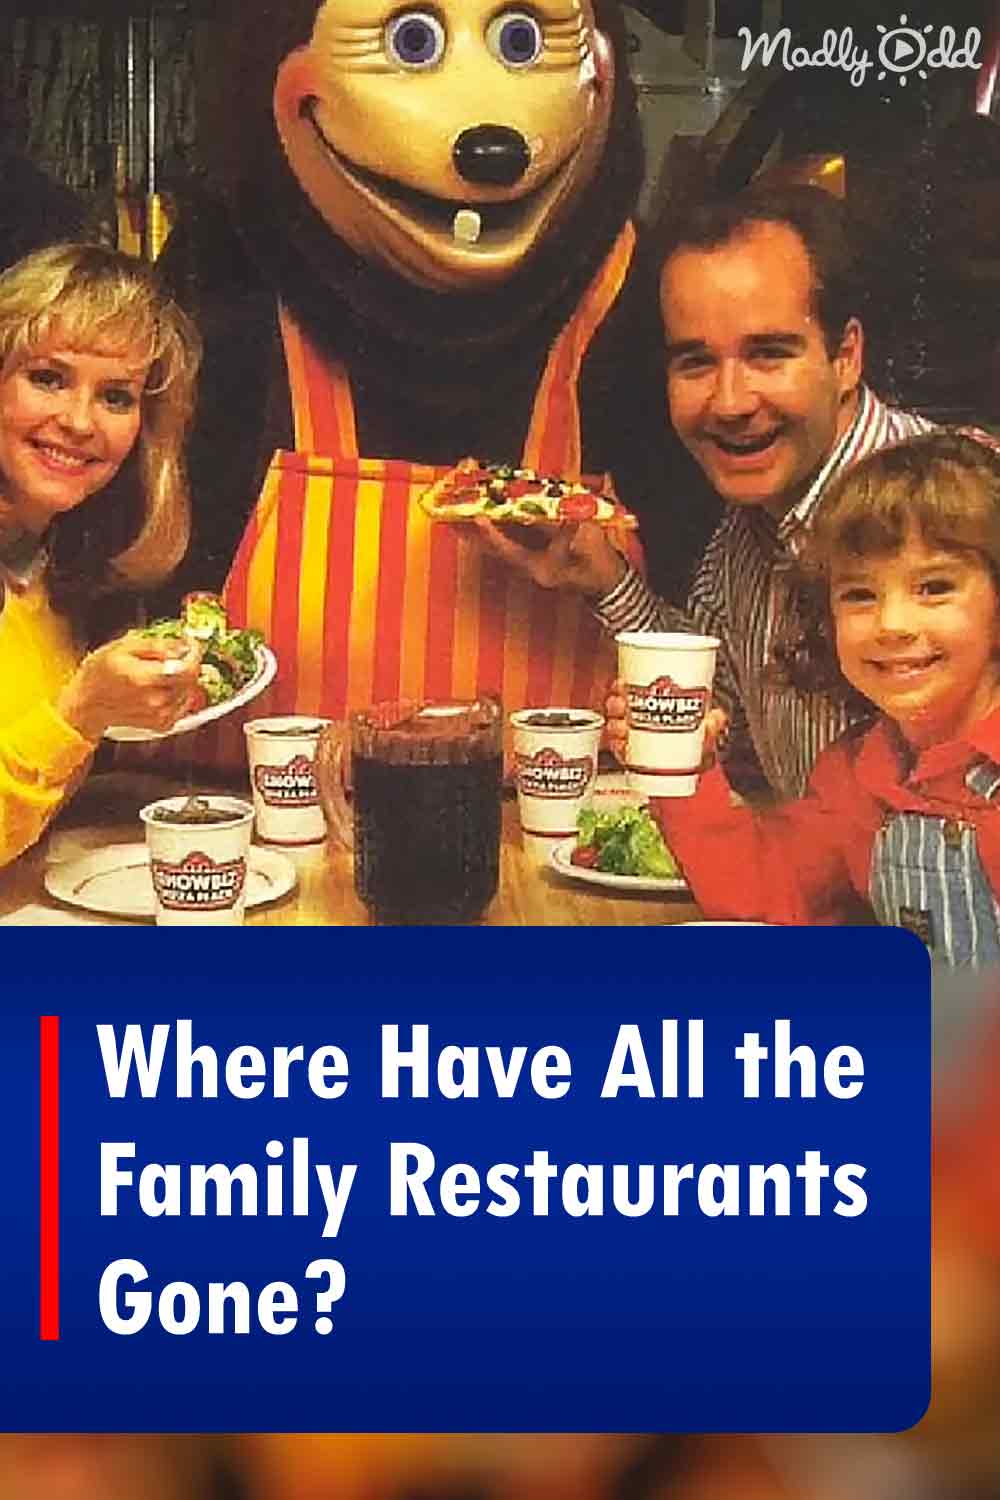 Where Have All the Family Restaurants Gone?